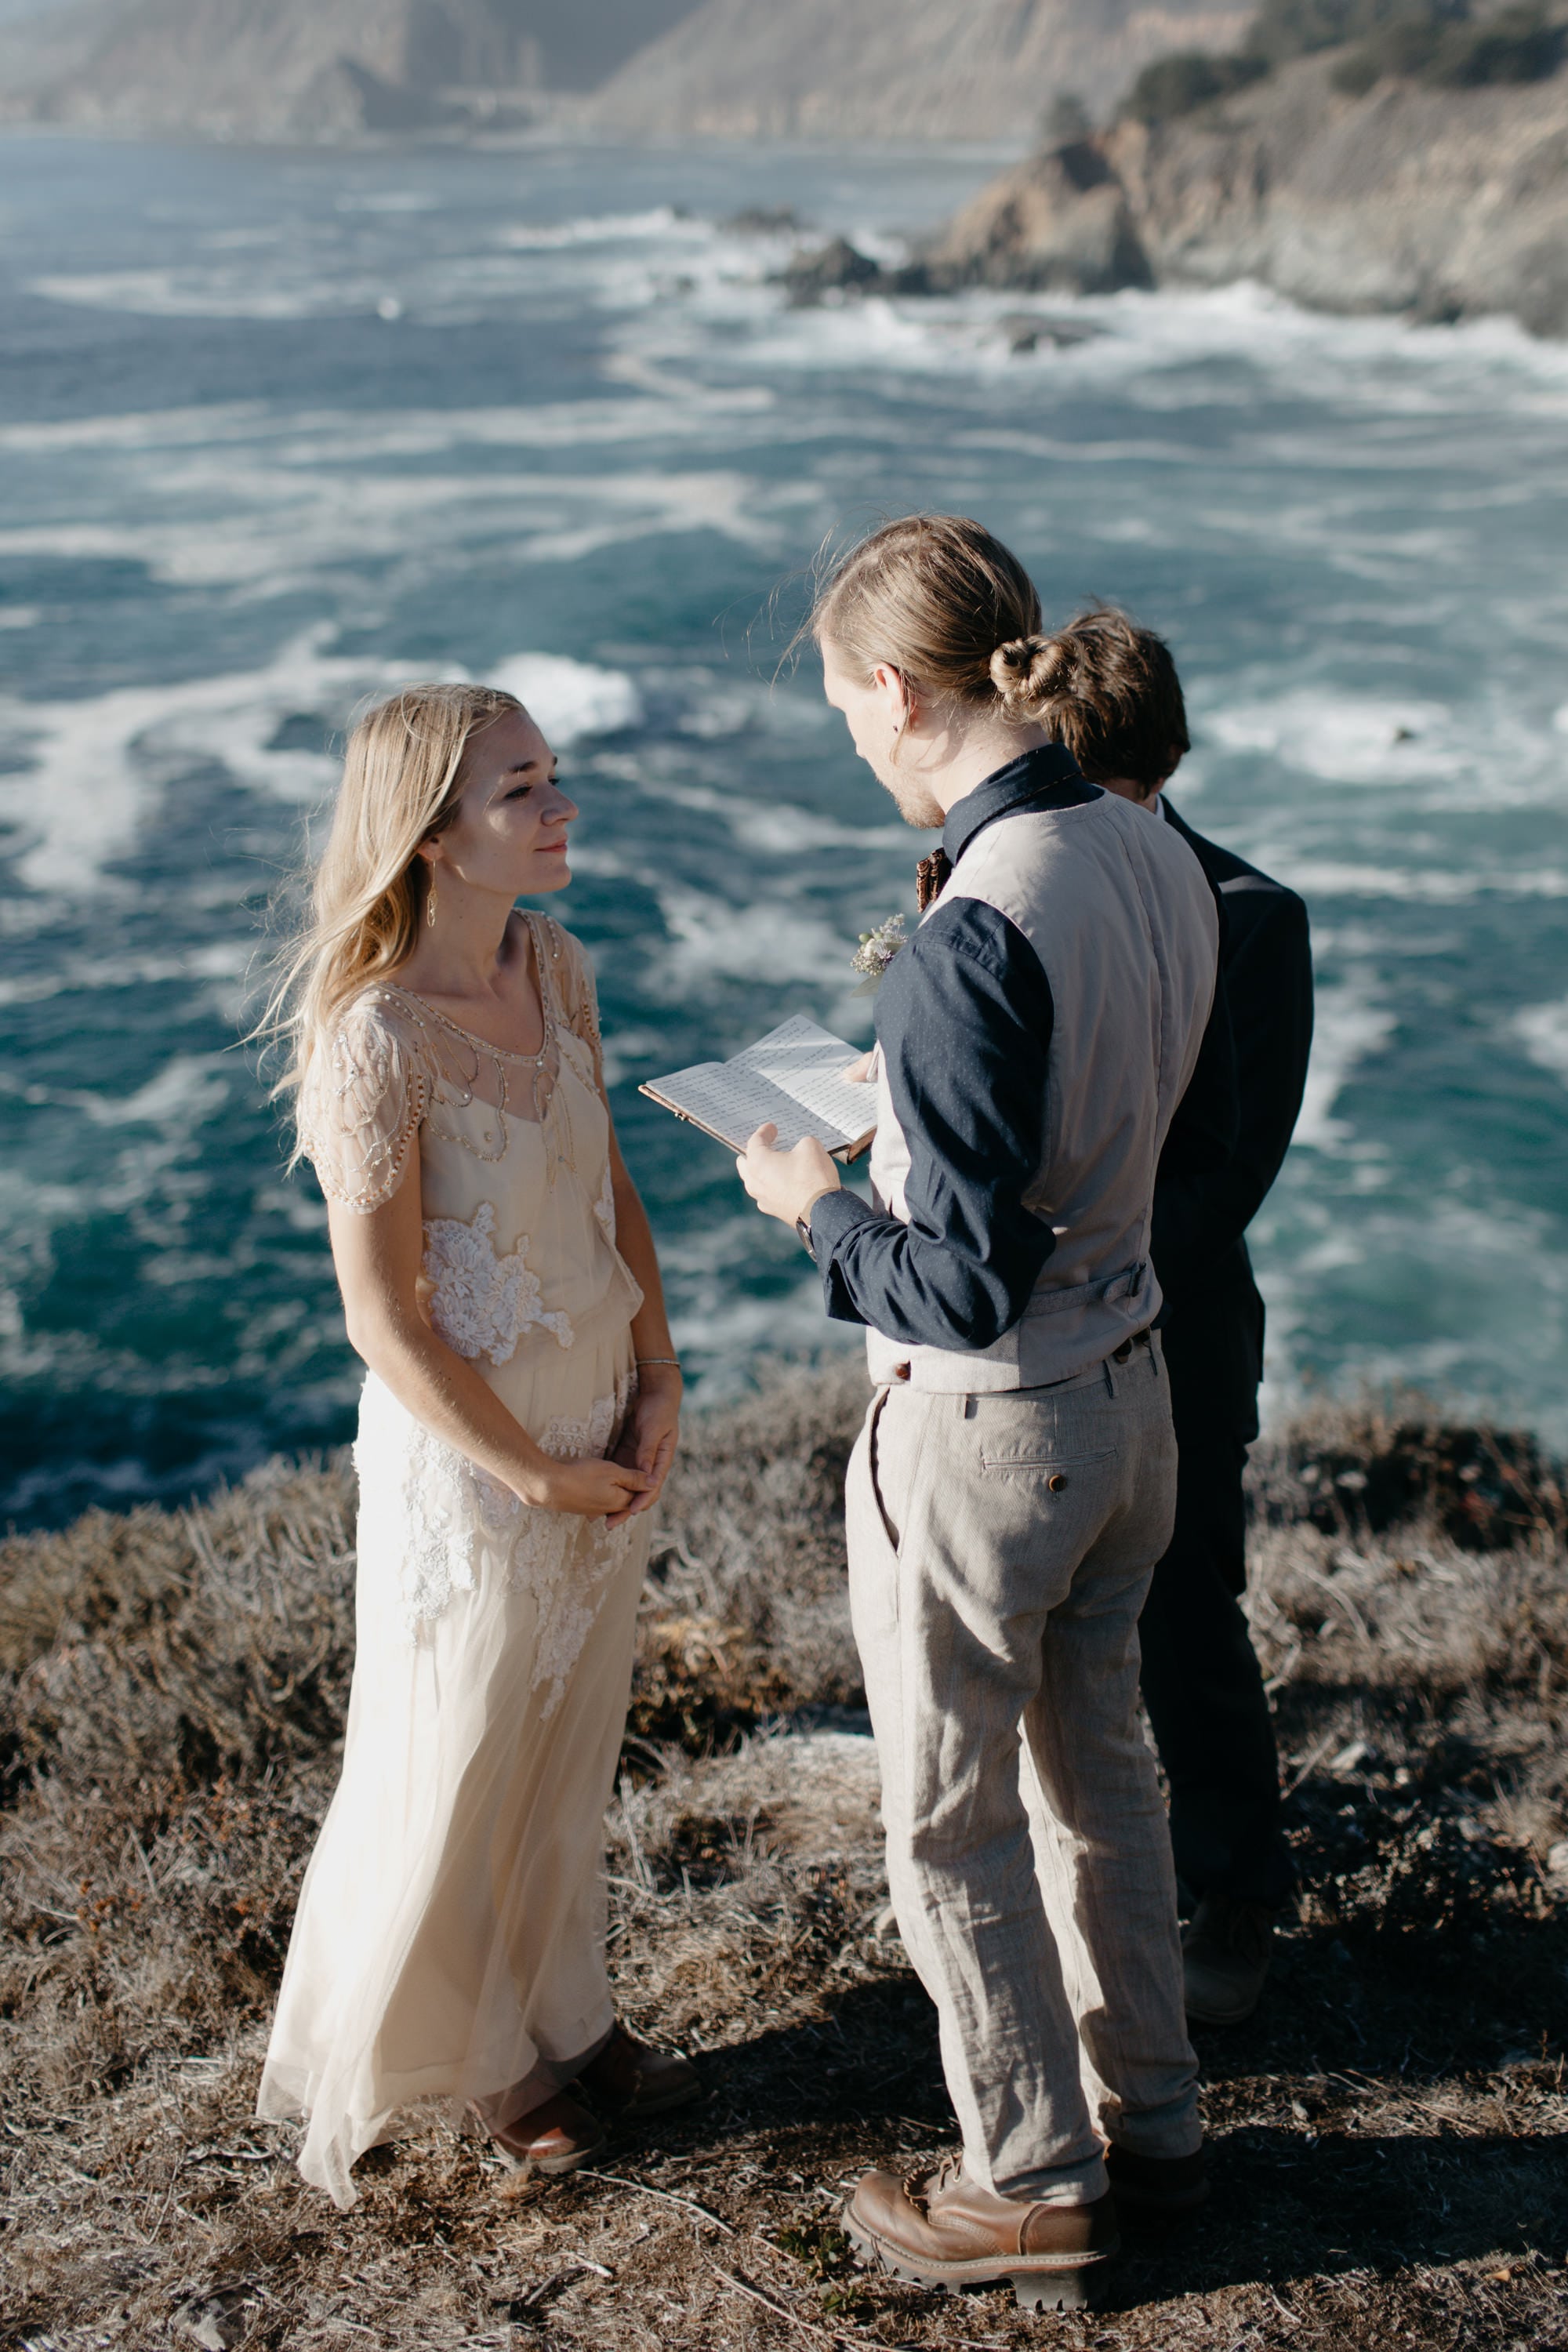 An intimate wedding ceremony on a cliff